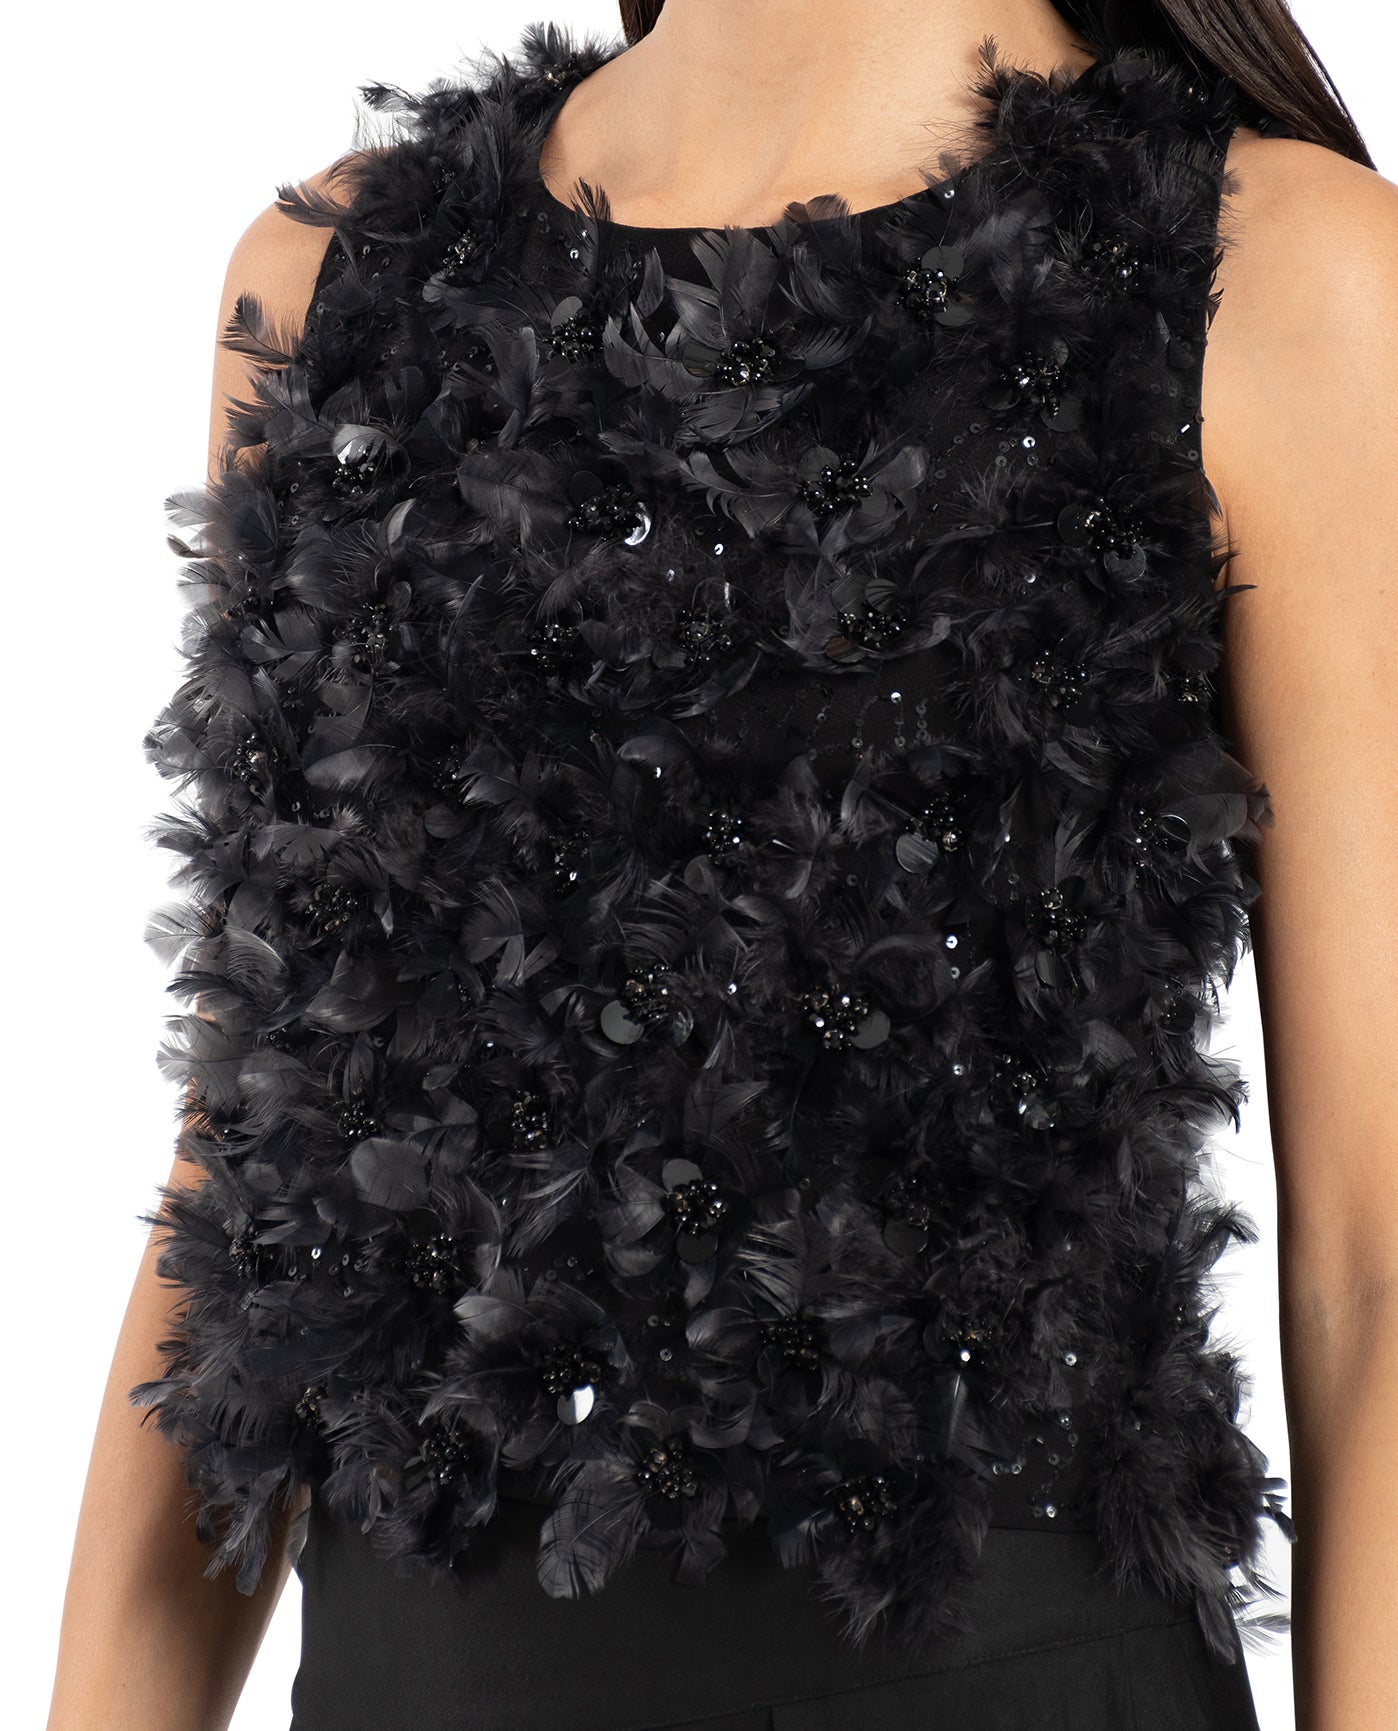 ZOOMED FRONT OF FEATHERED FLORAL SLEVELESS TOP | Black Feather